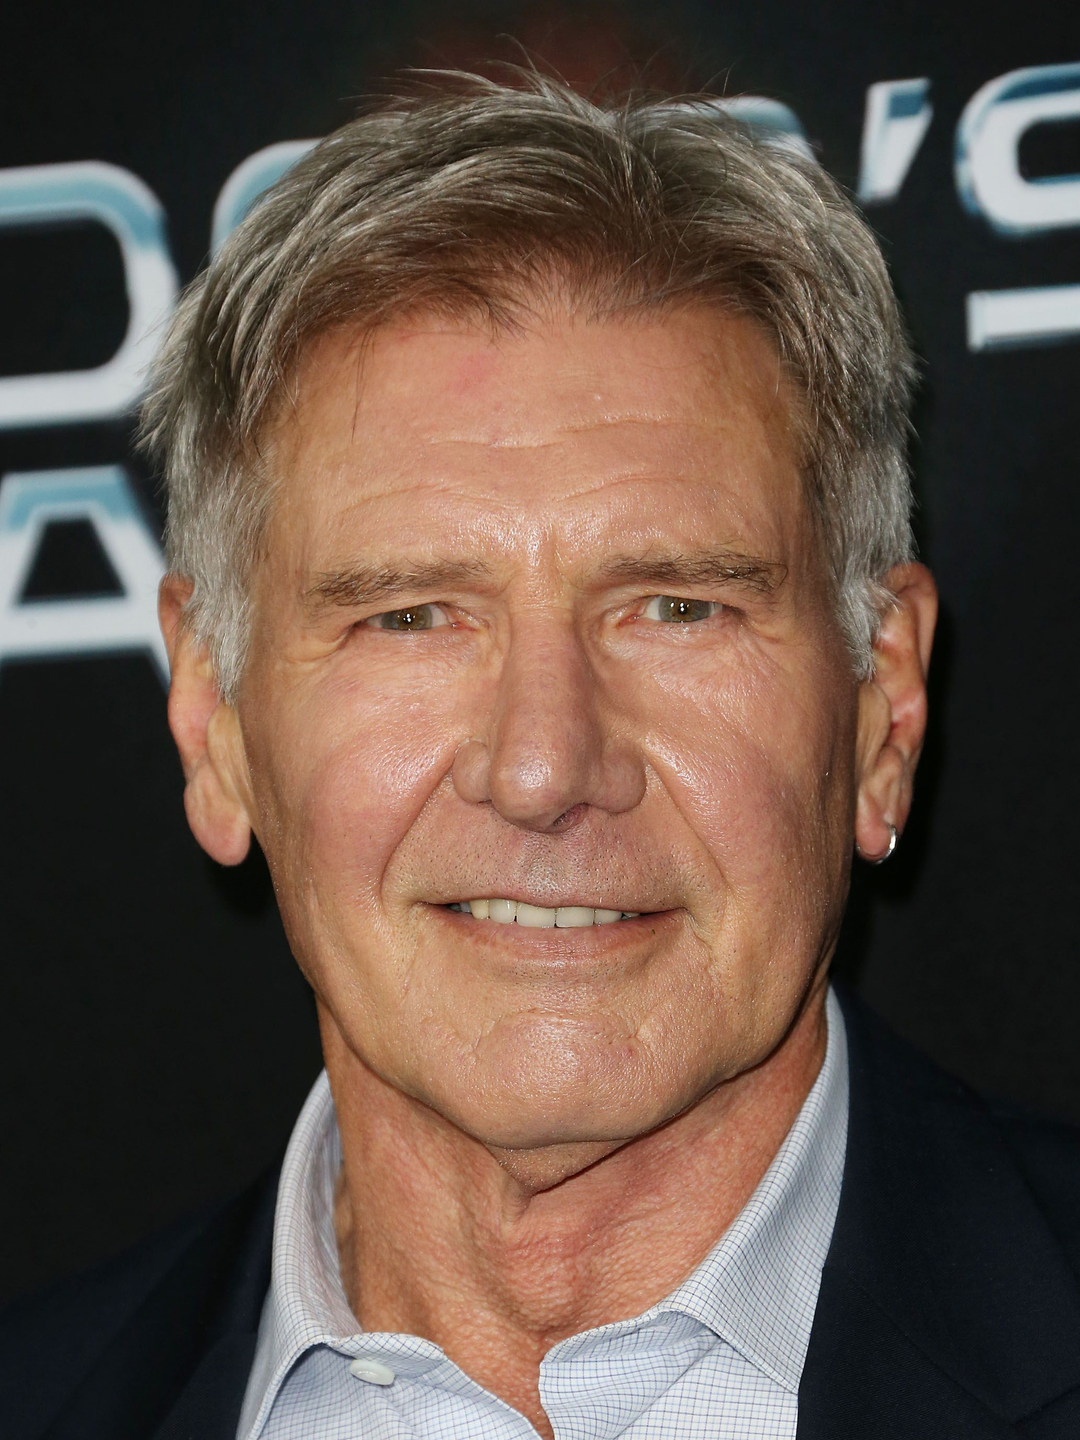 Harrison Ford biography